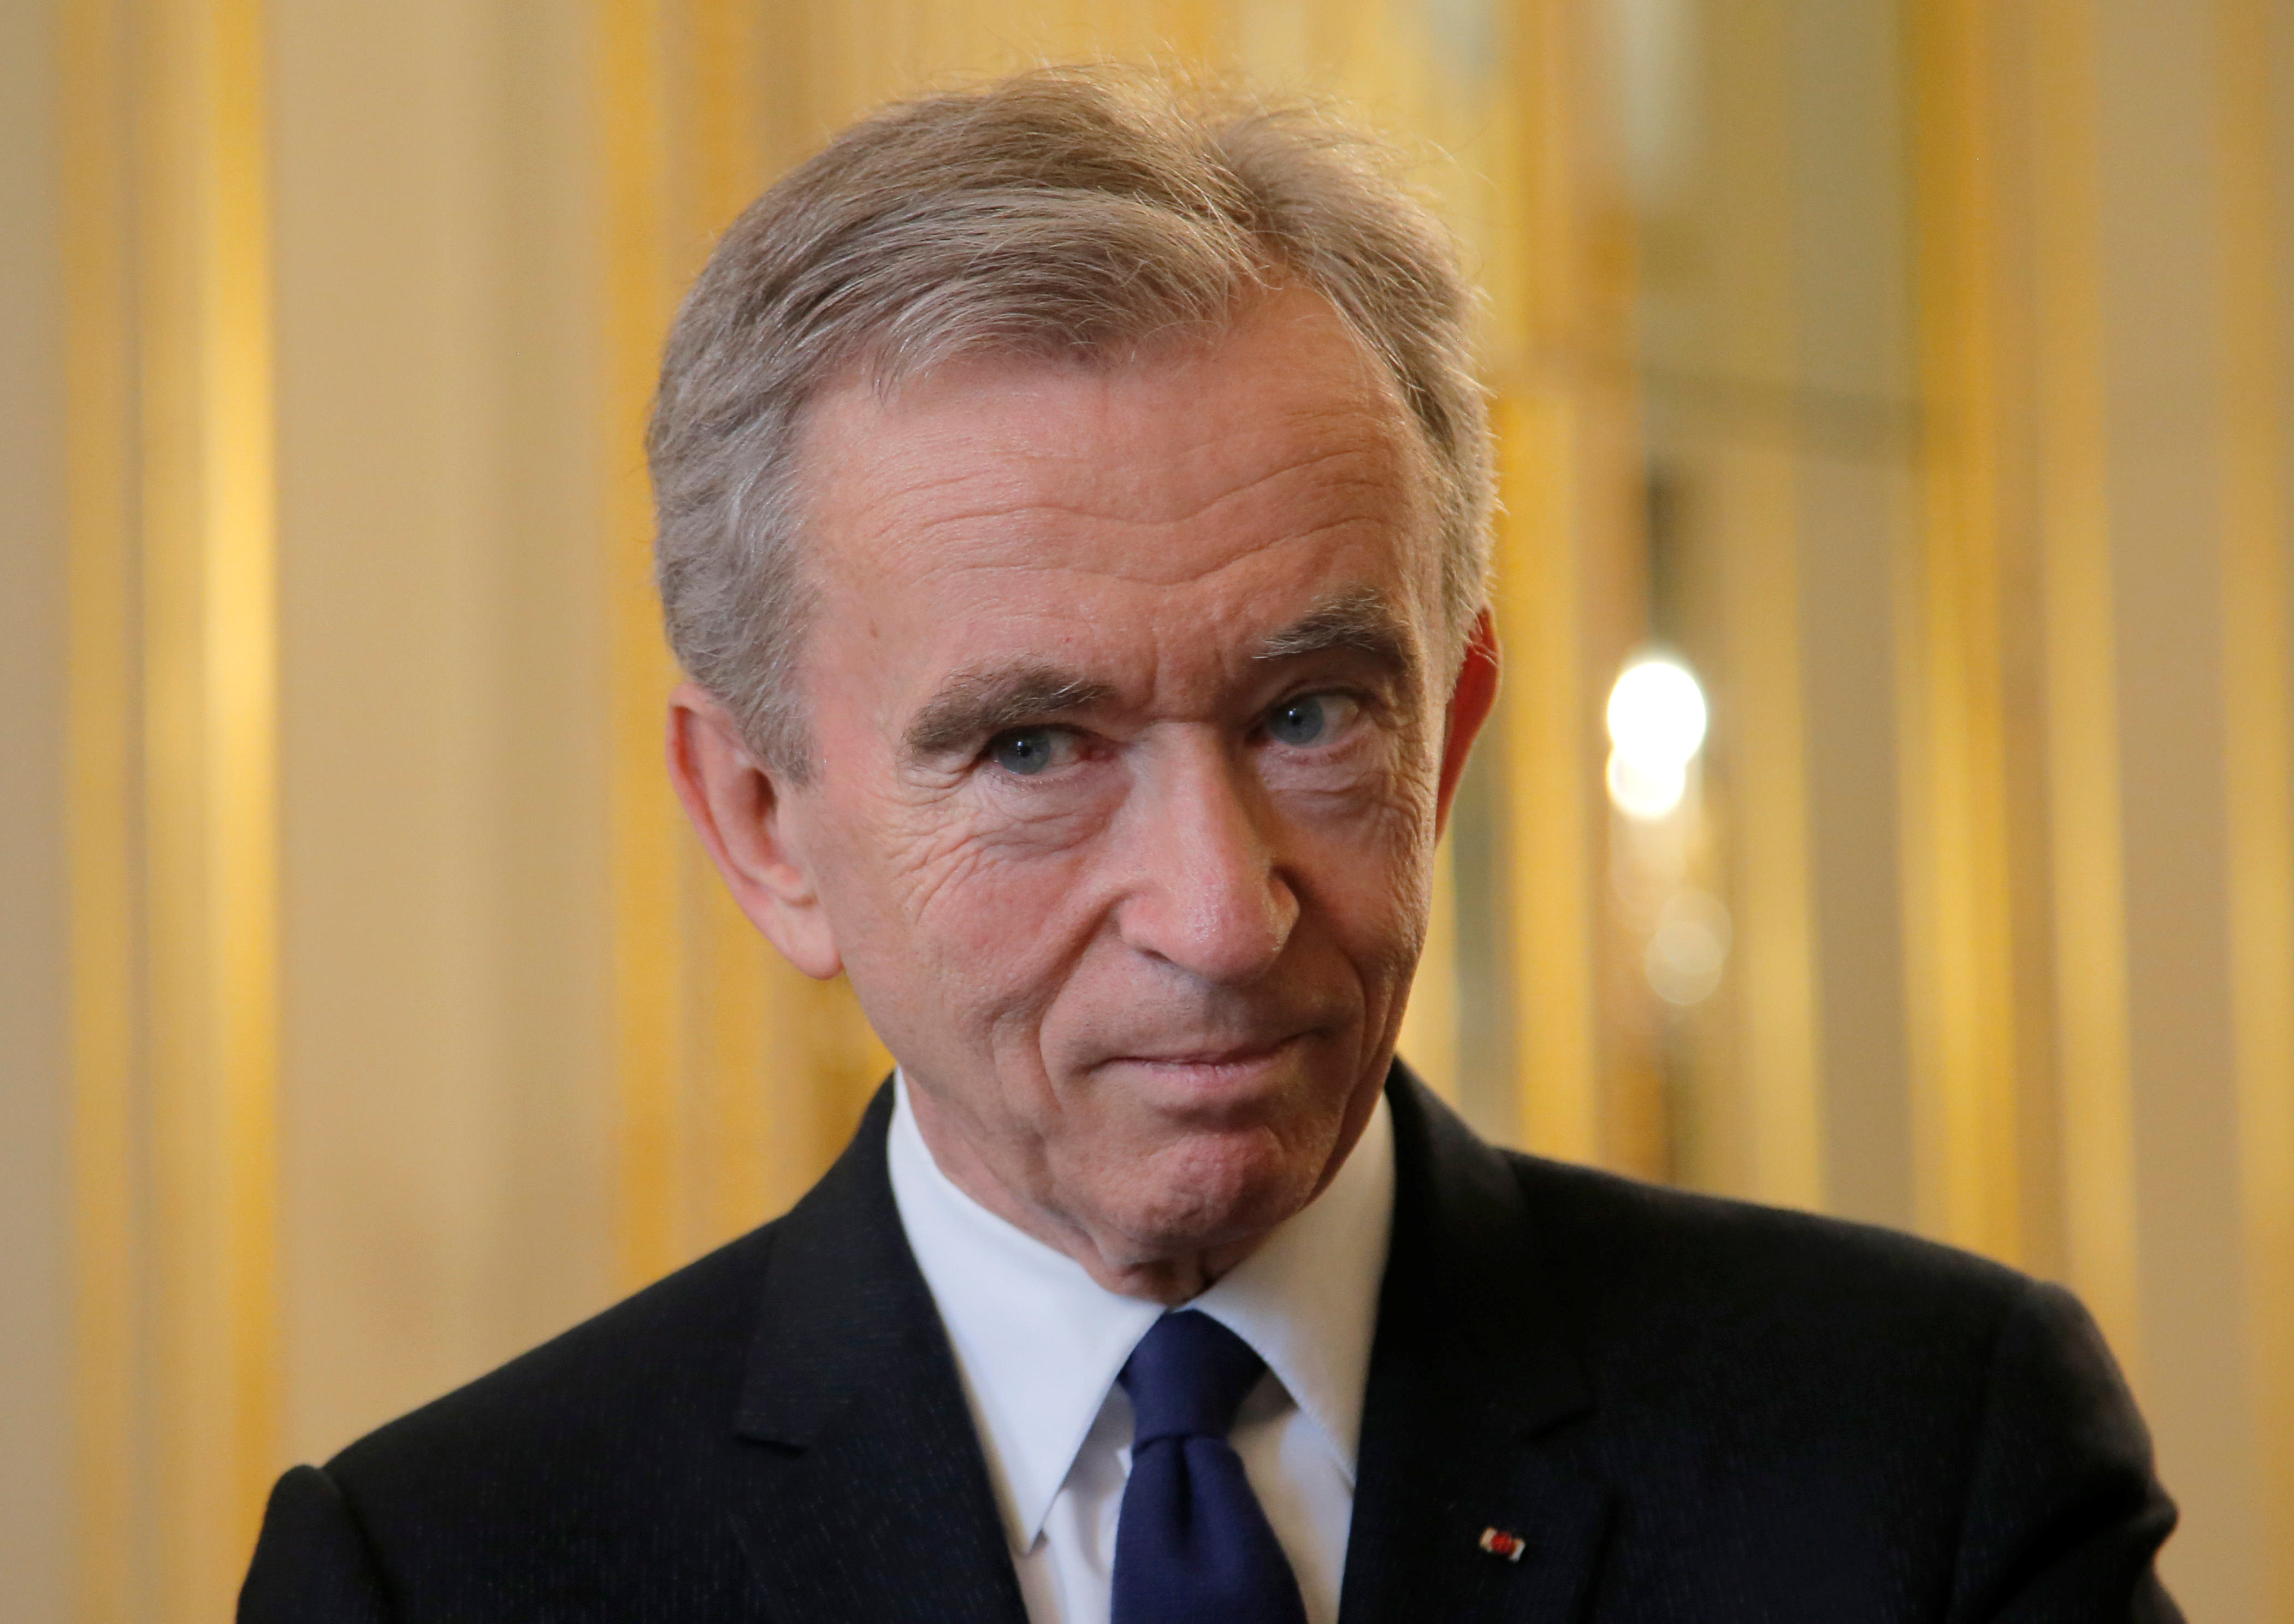 Bernard Arnault Just Bought Tiffany. Who Is He? - The New York Times